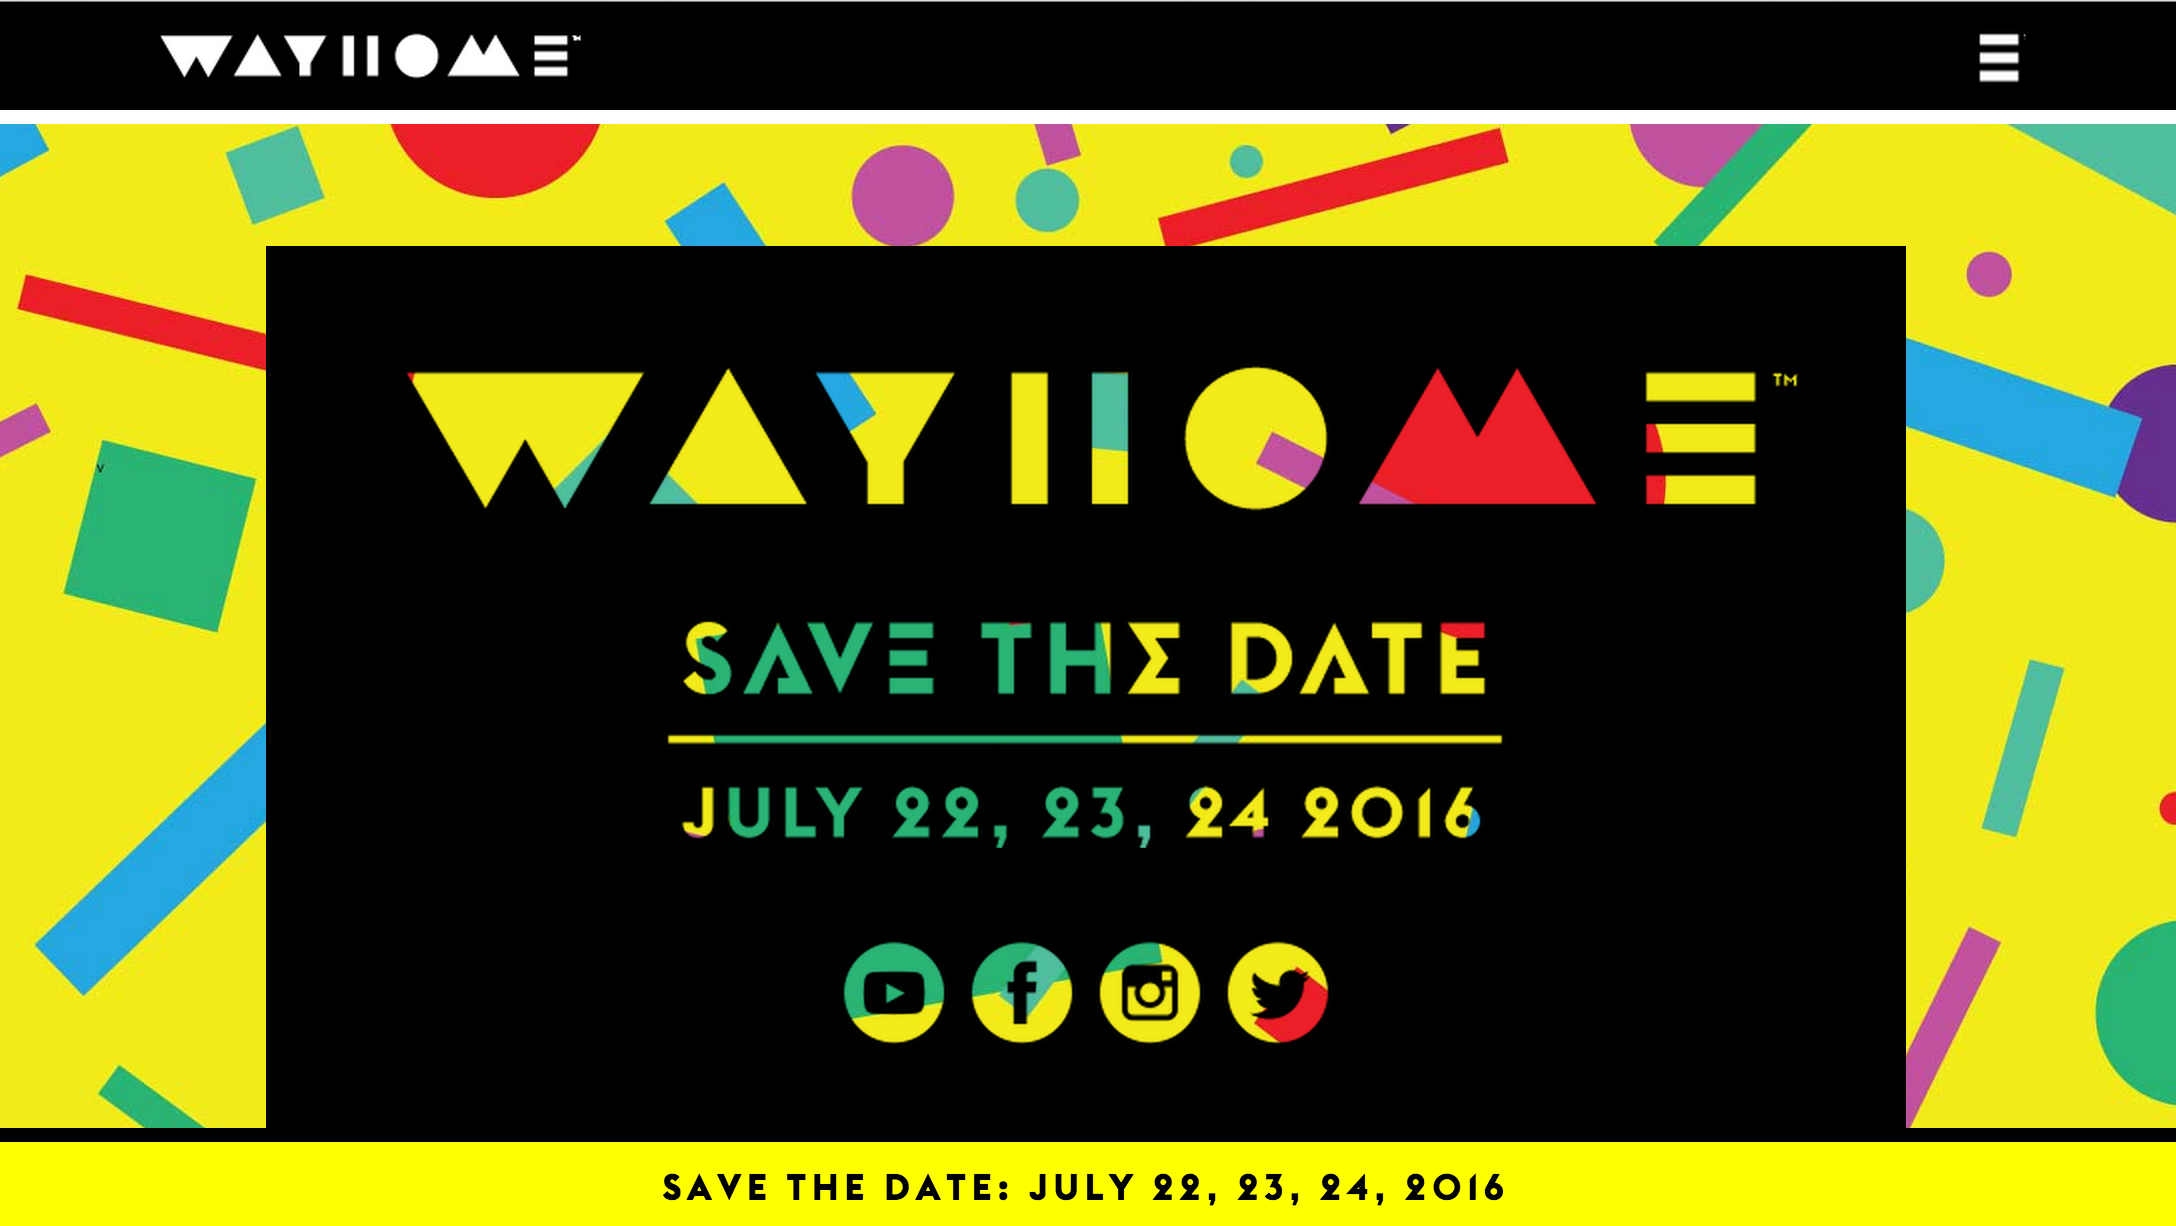 WayHome 2016 Announcement